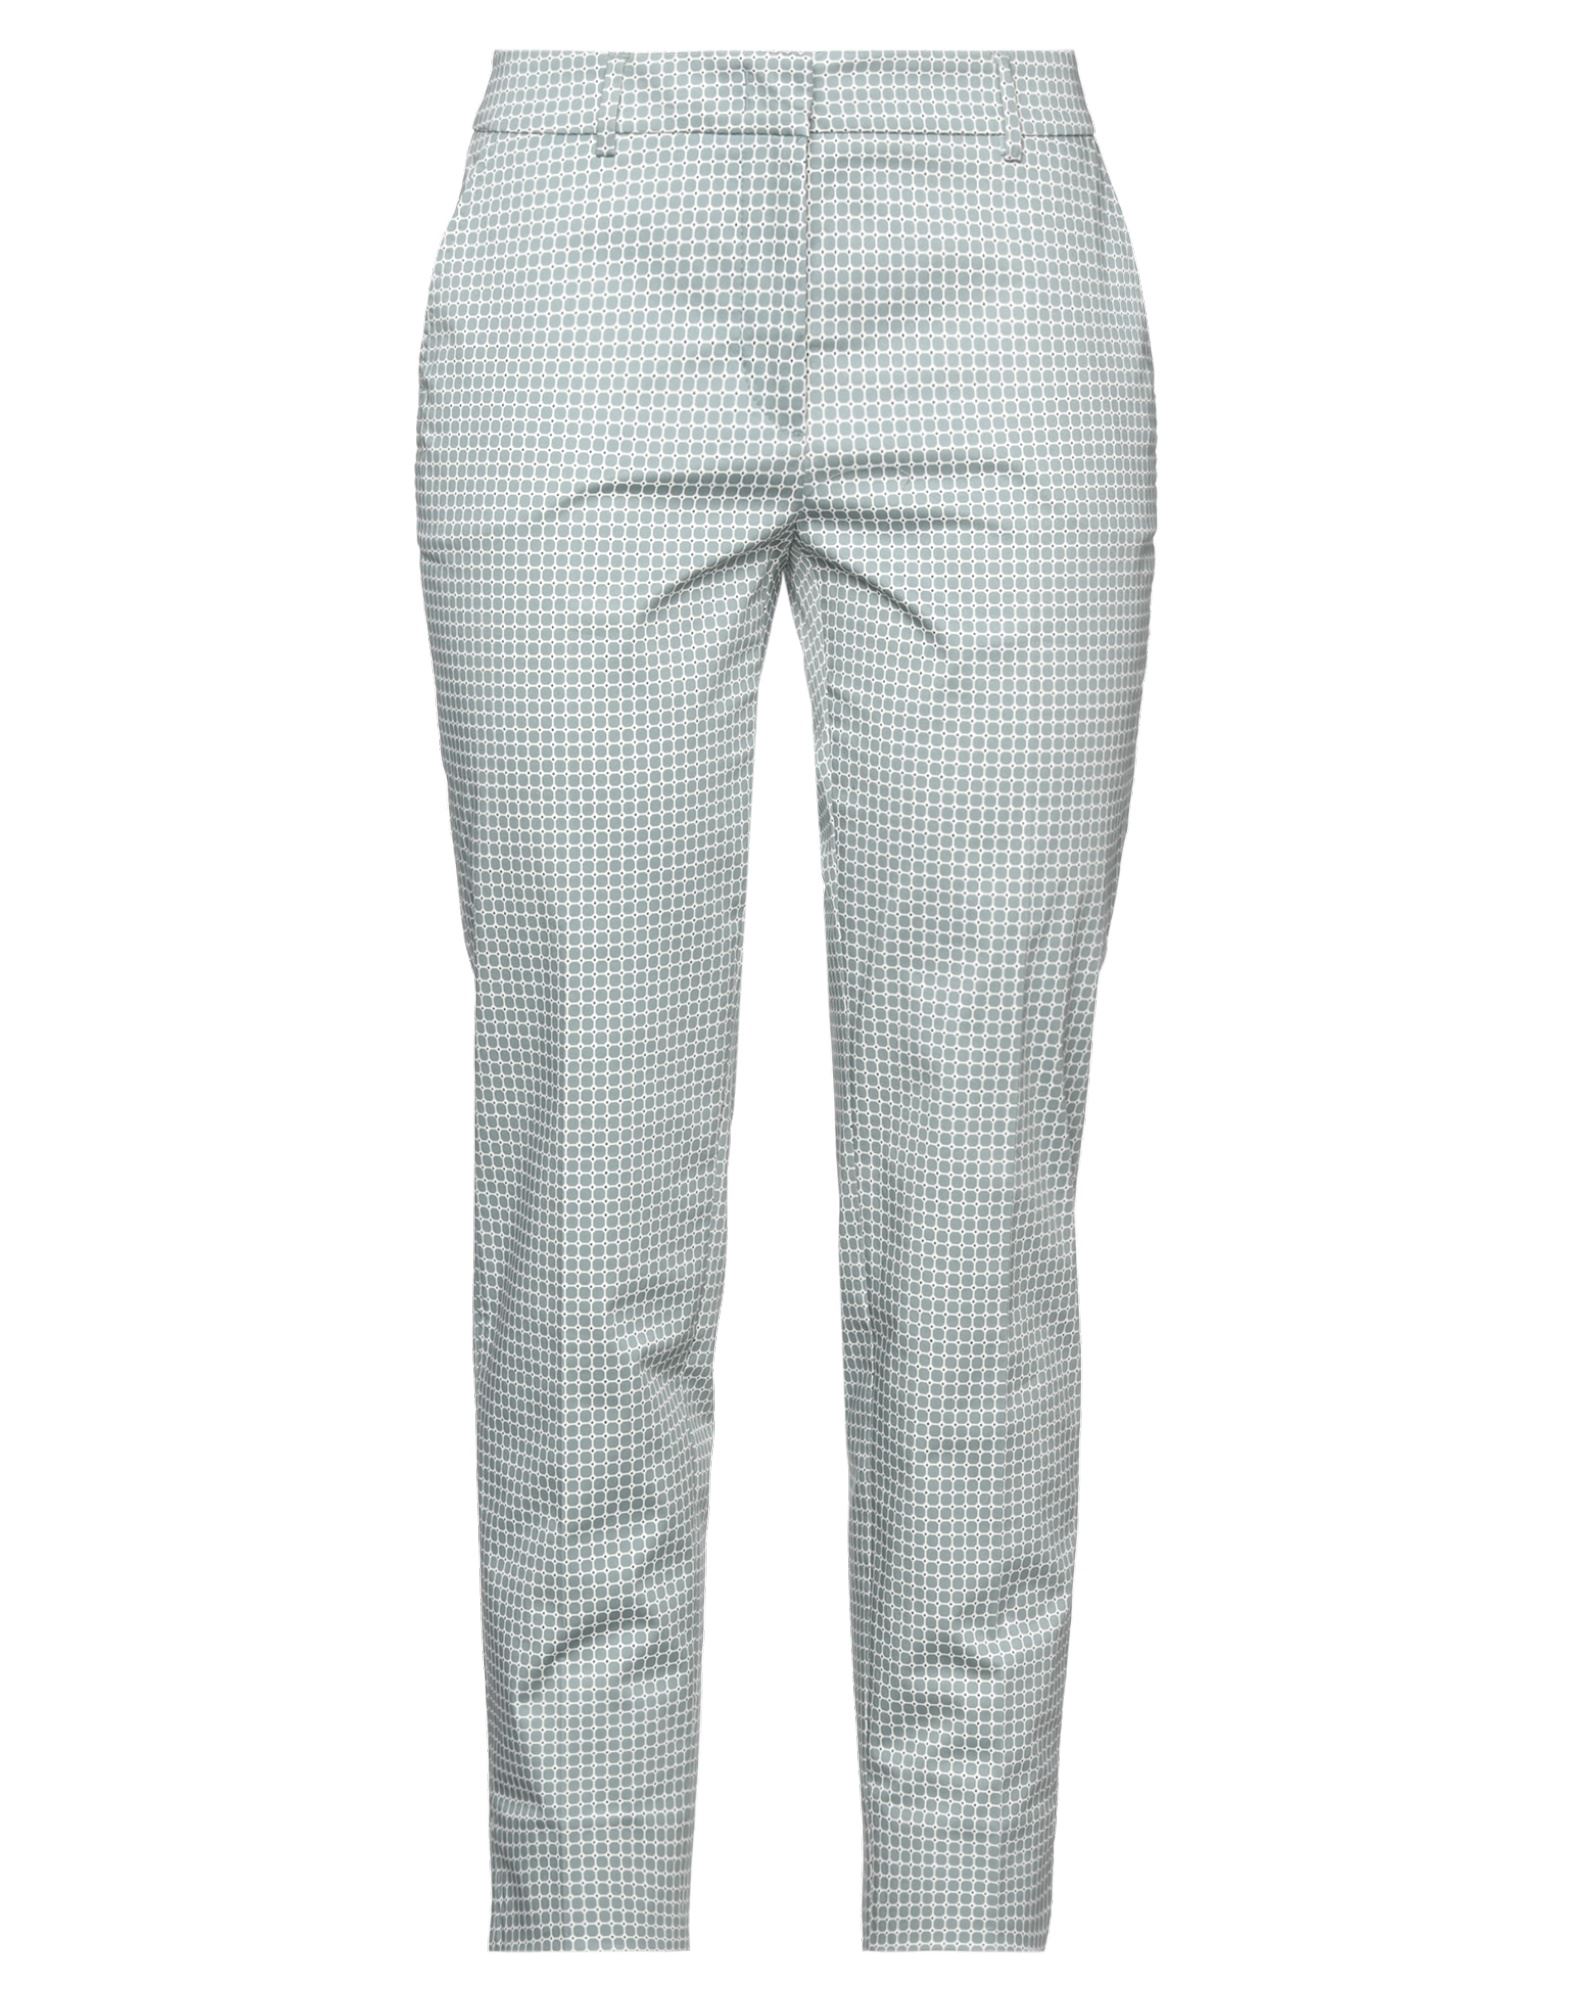 Accuà By Psr Pants In Grey